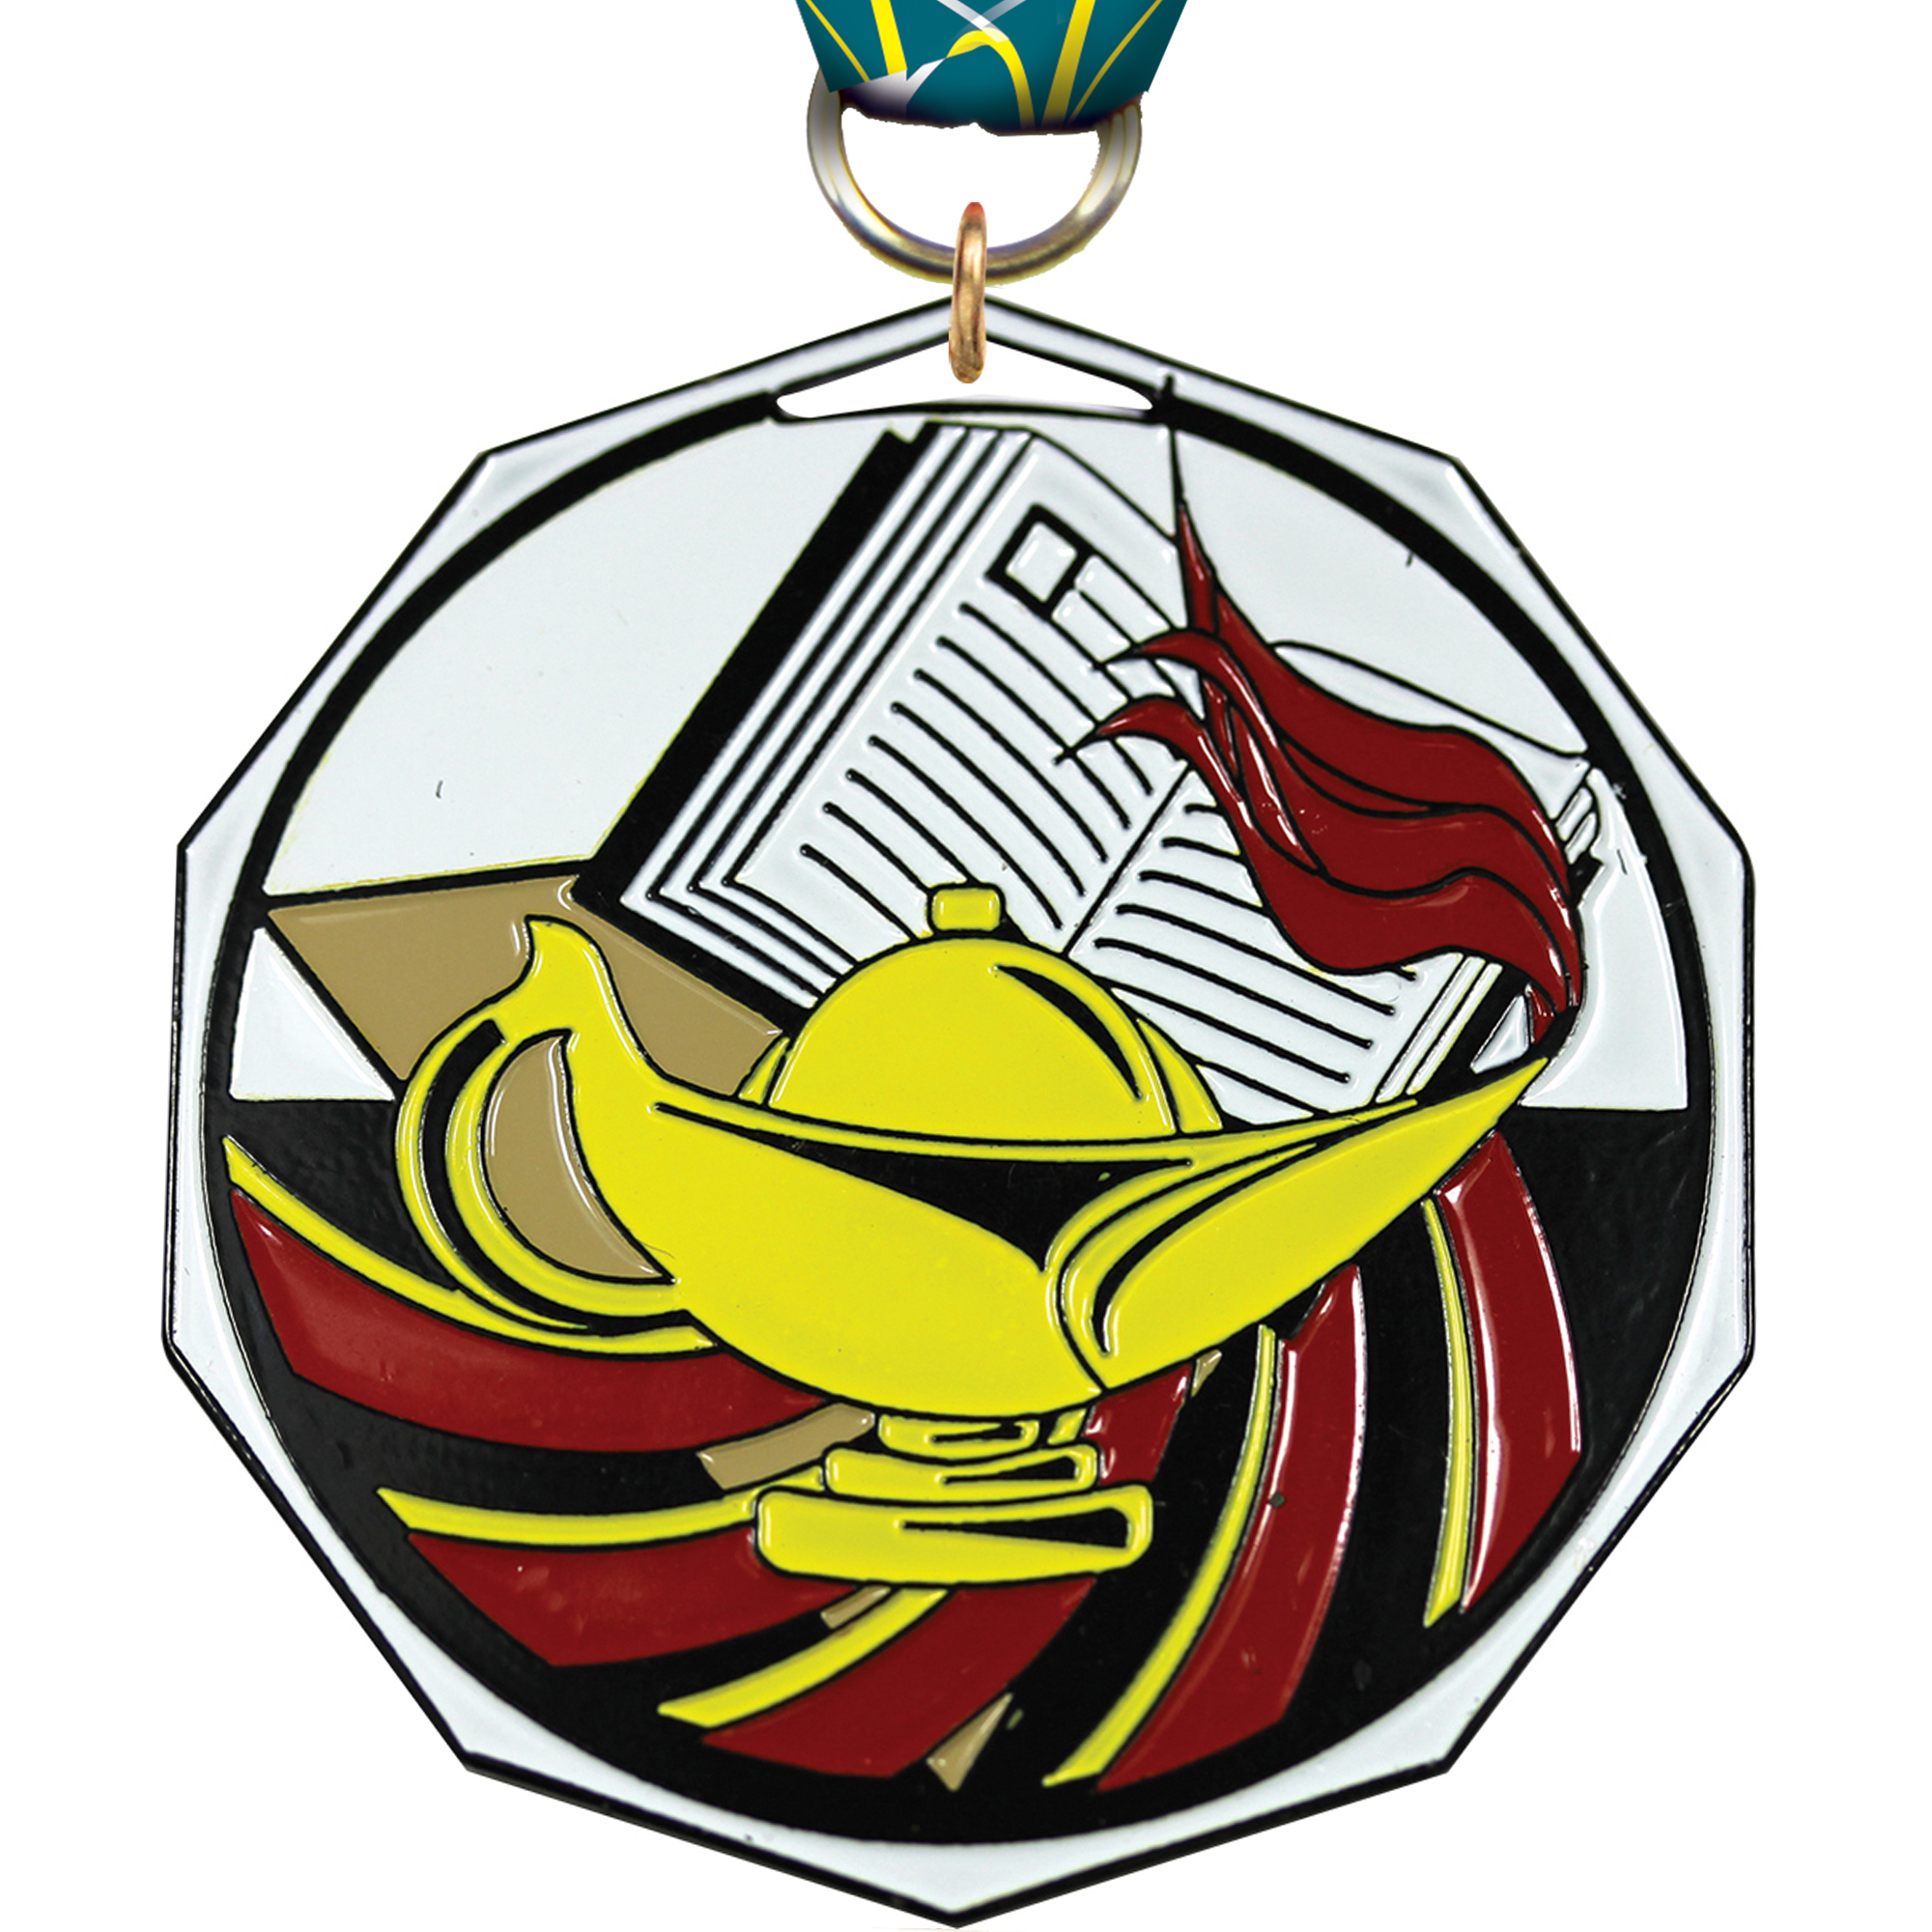 Knowledge Decagon Painted Medal